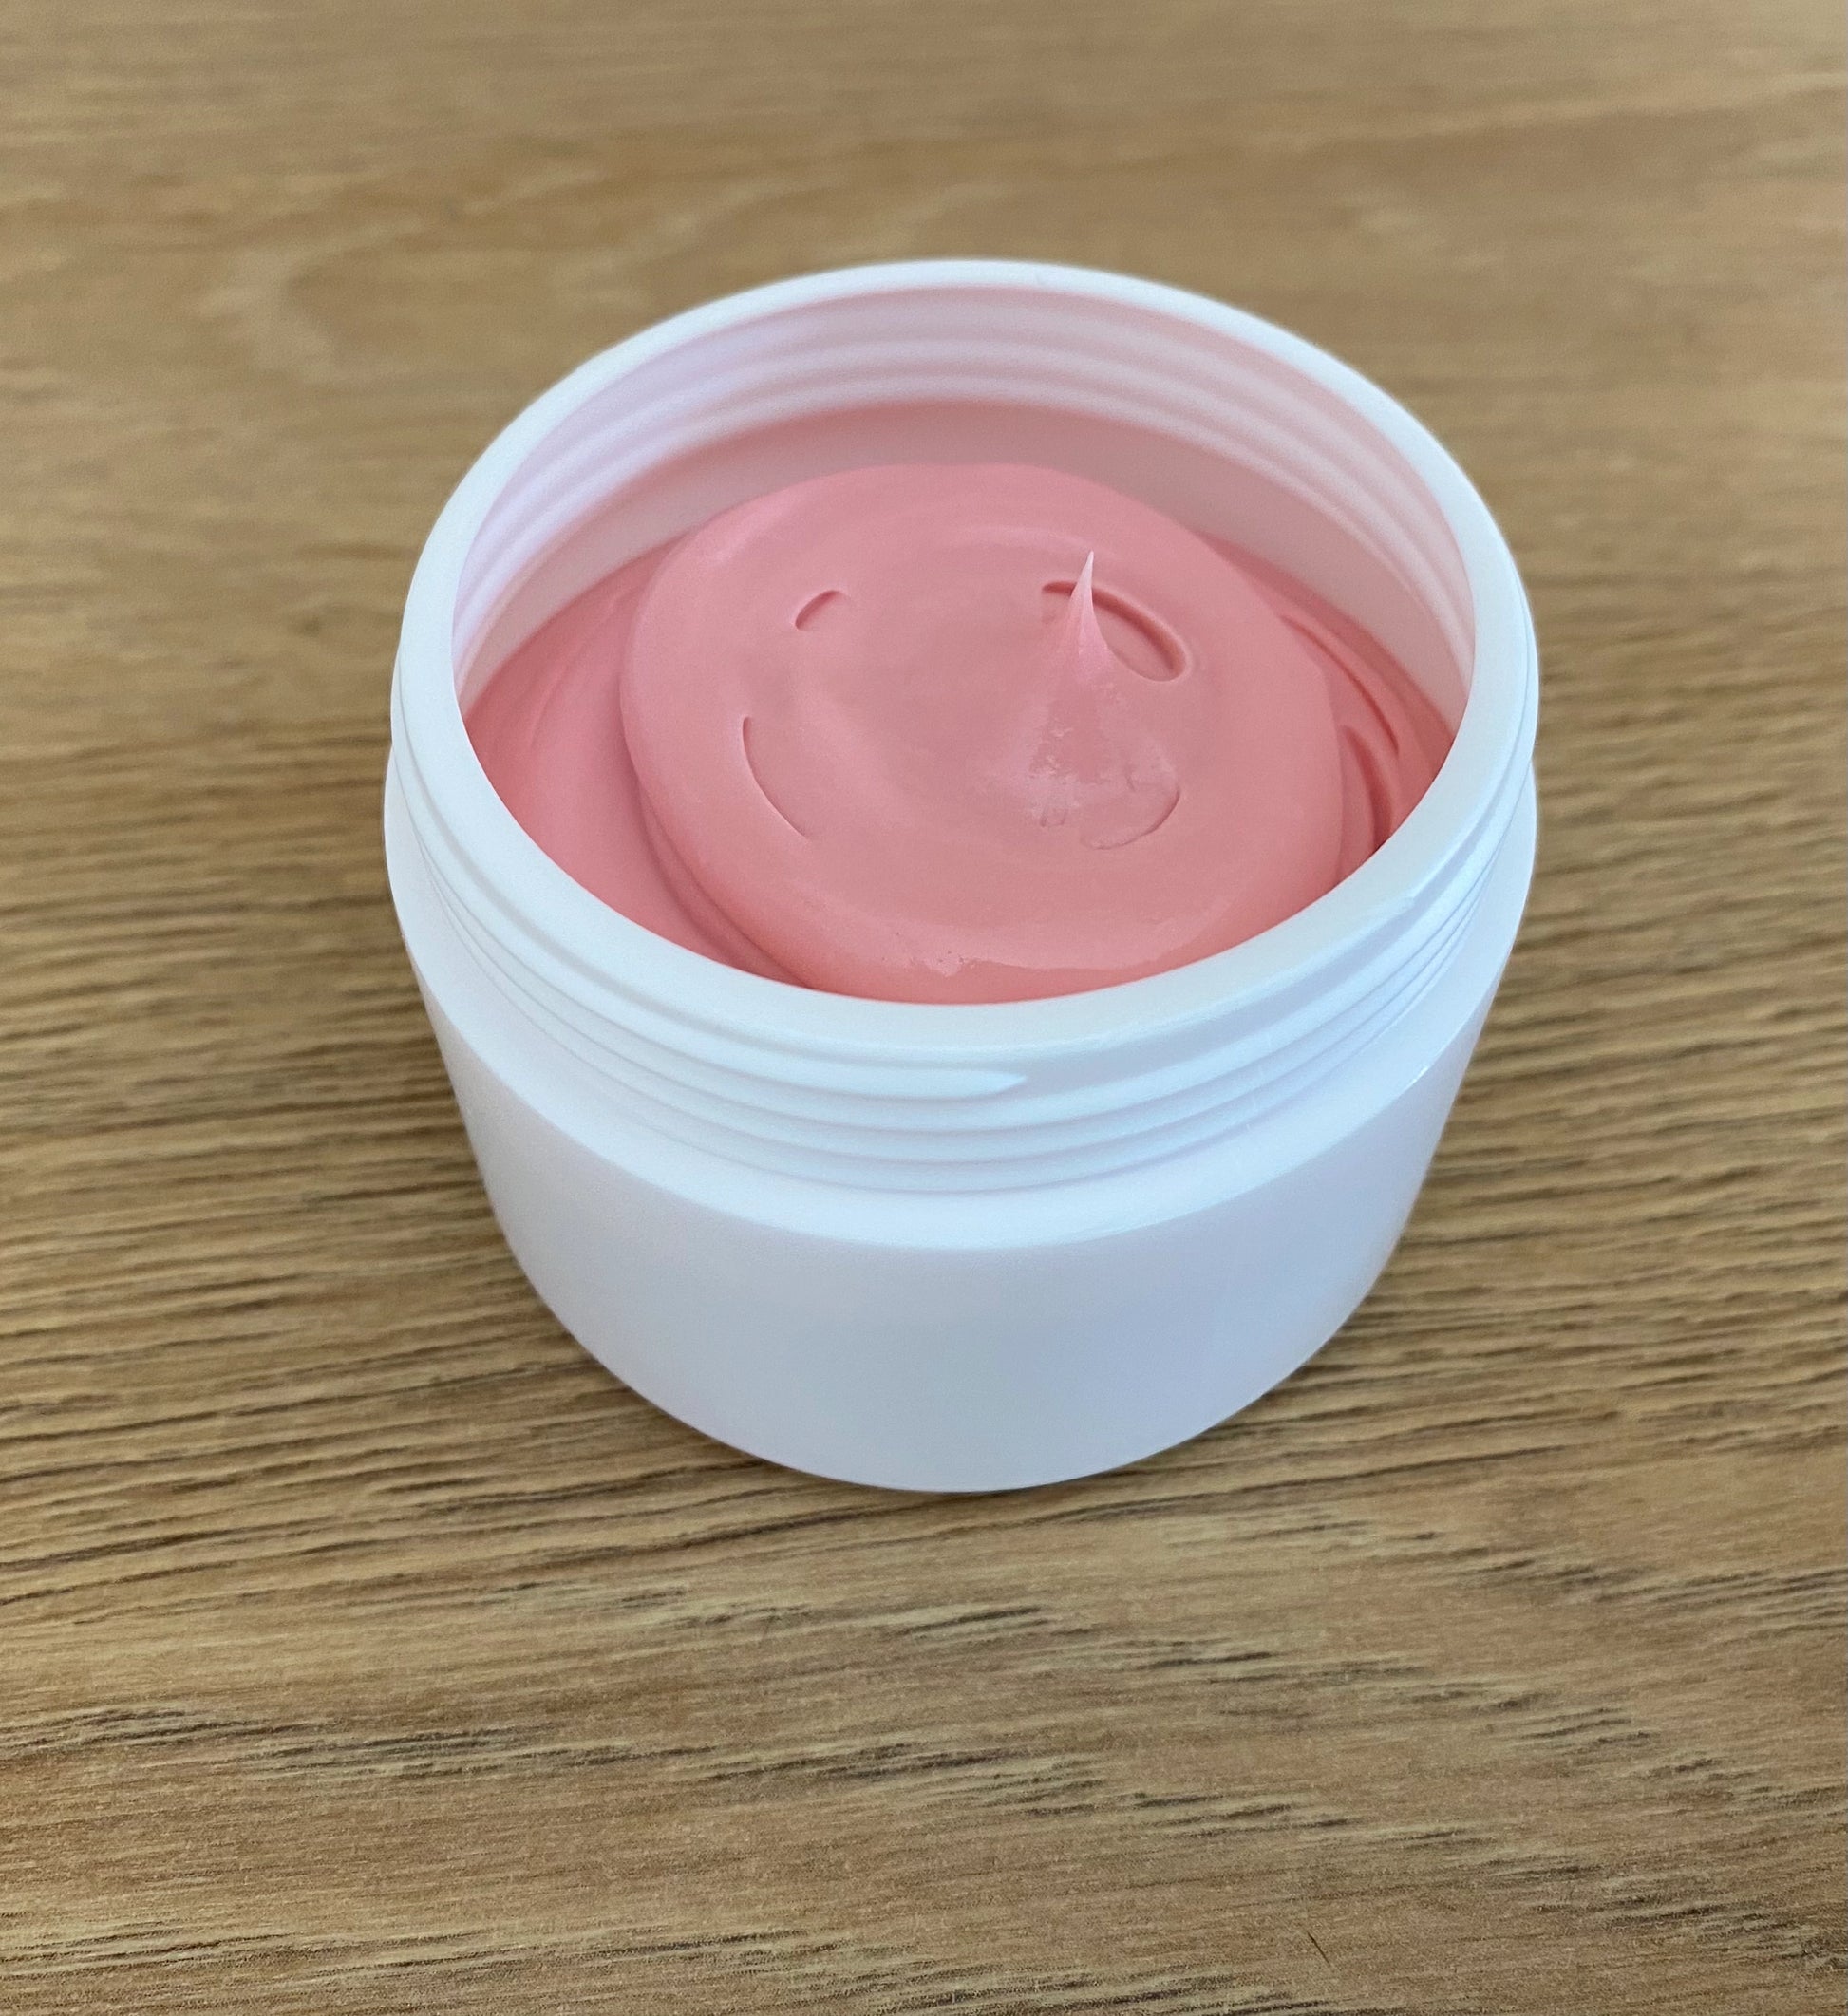 No.9 Calming Pink Cream - Isabelskincare